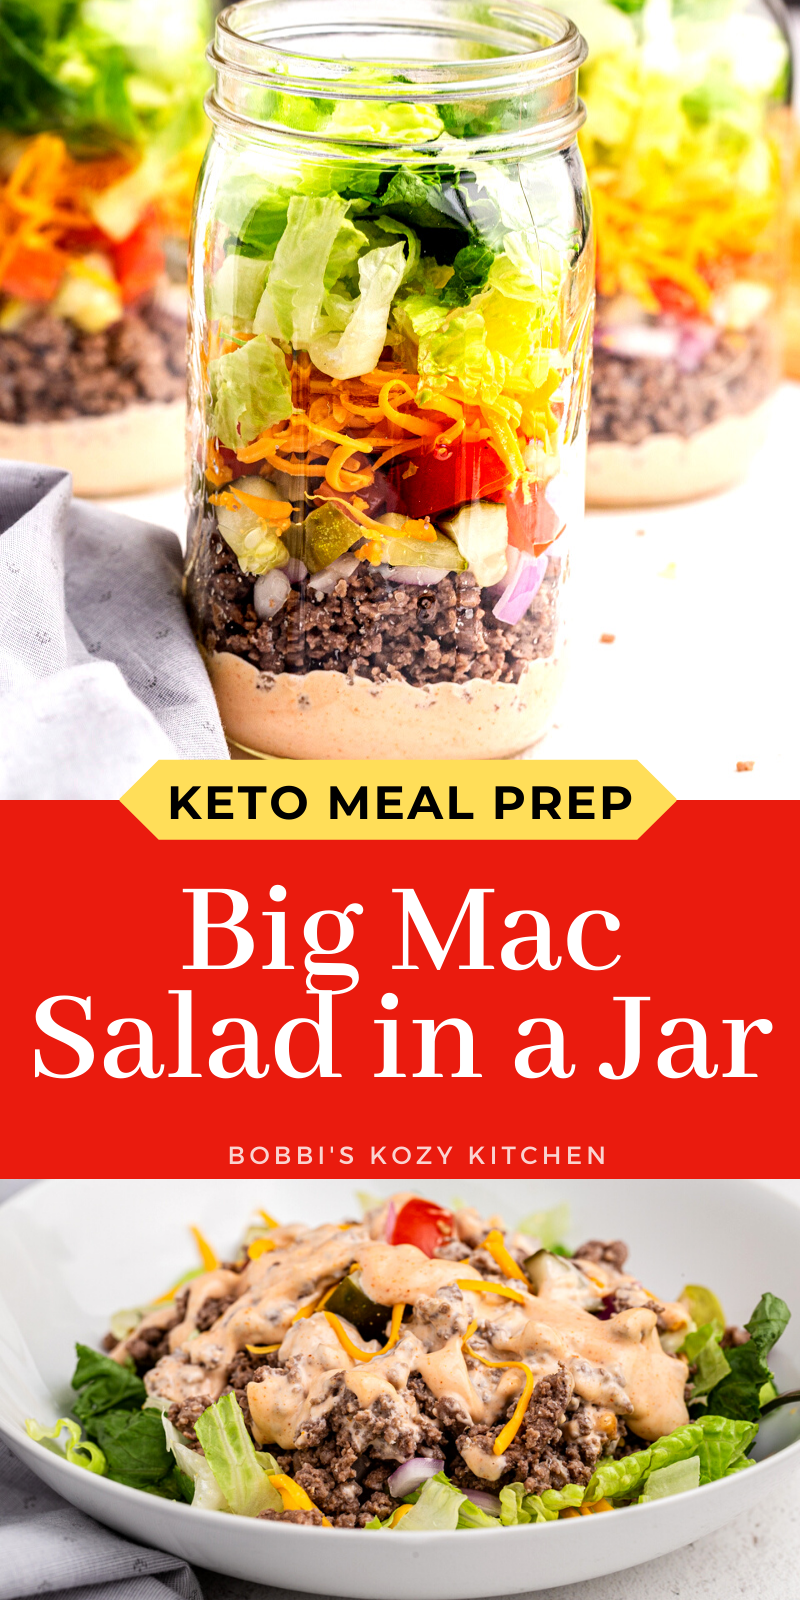 Big Mac Salad in a Jar (Keto Meal Prep) - This Big Mac Salad in a Jar recipe is the perfect way to meal prep for your keto and low carb lunches. You get all the flavor of your favorite fast food cheeseburger without the carbs! #keto #lowcarb #glutenfree #sugarfree #salad #bigmac #cheeseburger #saladinajar